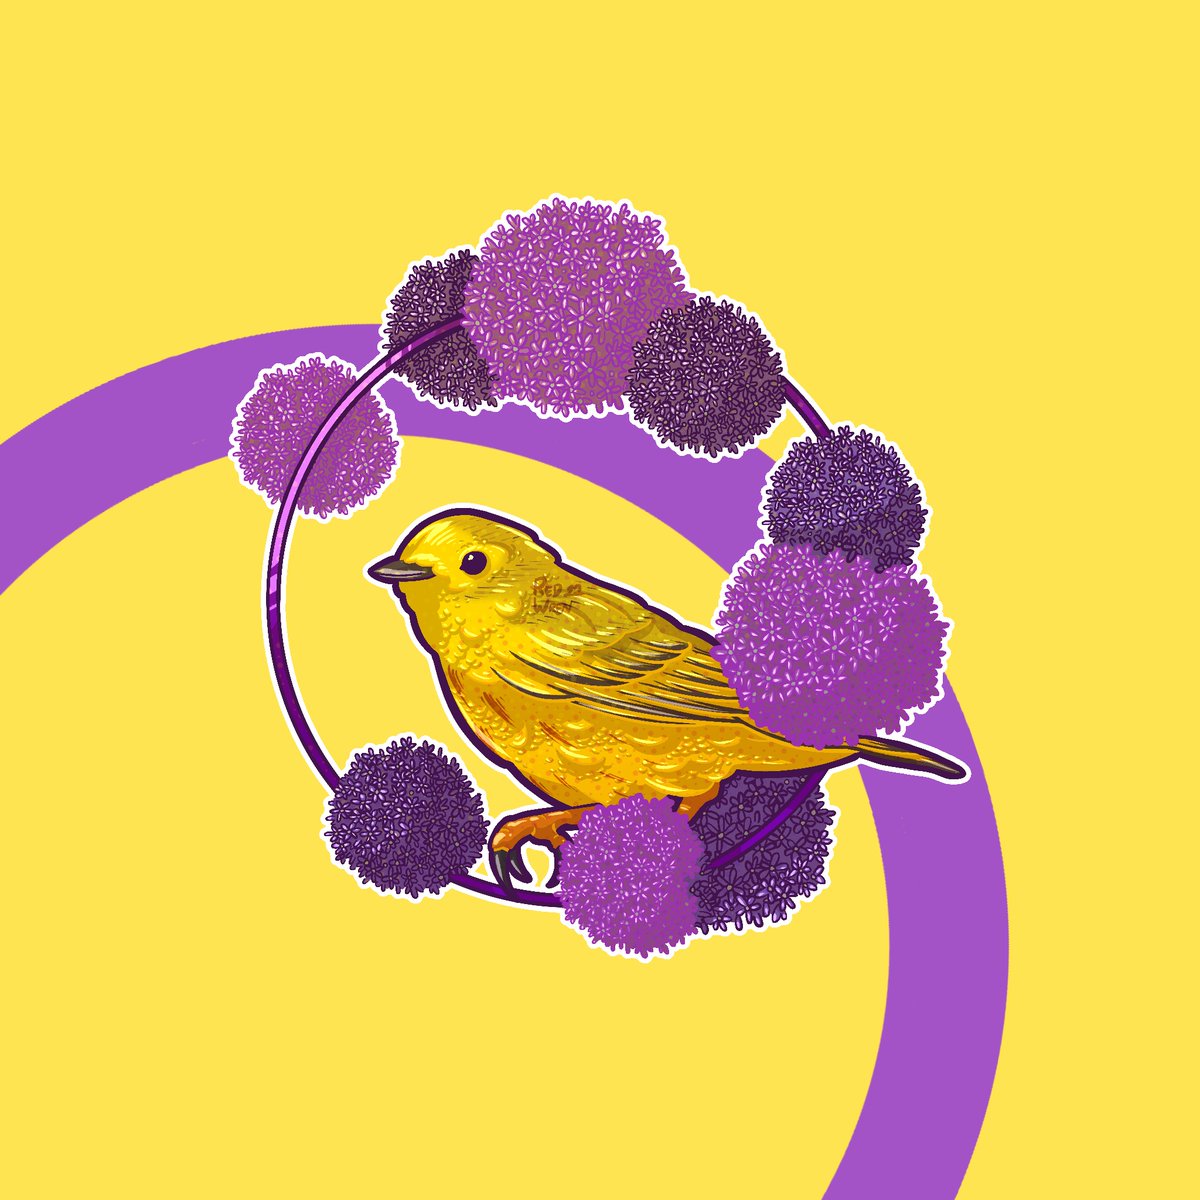 Happy Pride Month!! 🏳️‍🌈

Todays piece represents the Intersex community with their flag behind a Yellow Warbler and Purple Allium Bulbs.

We can't wait to share them all with you!

#pride #art #pridebirds #intersexpride #intersex #warbler #purplealliumbulbs #allium #flowers